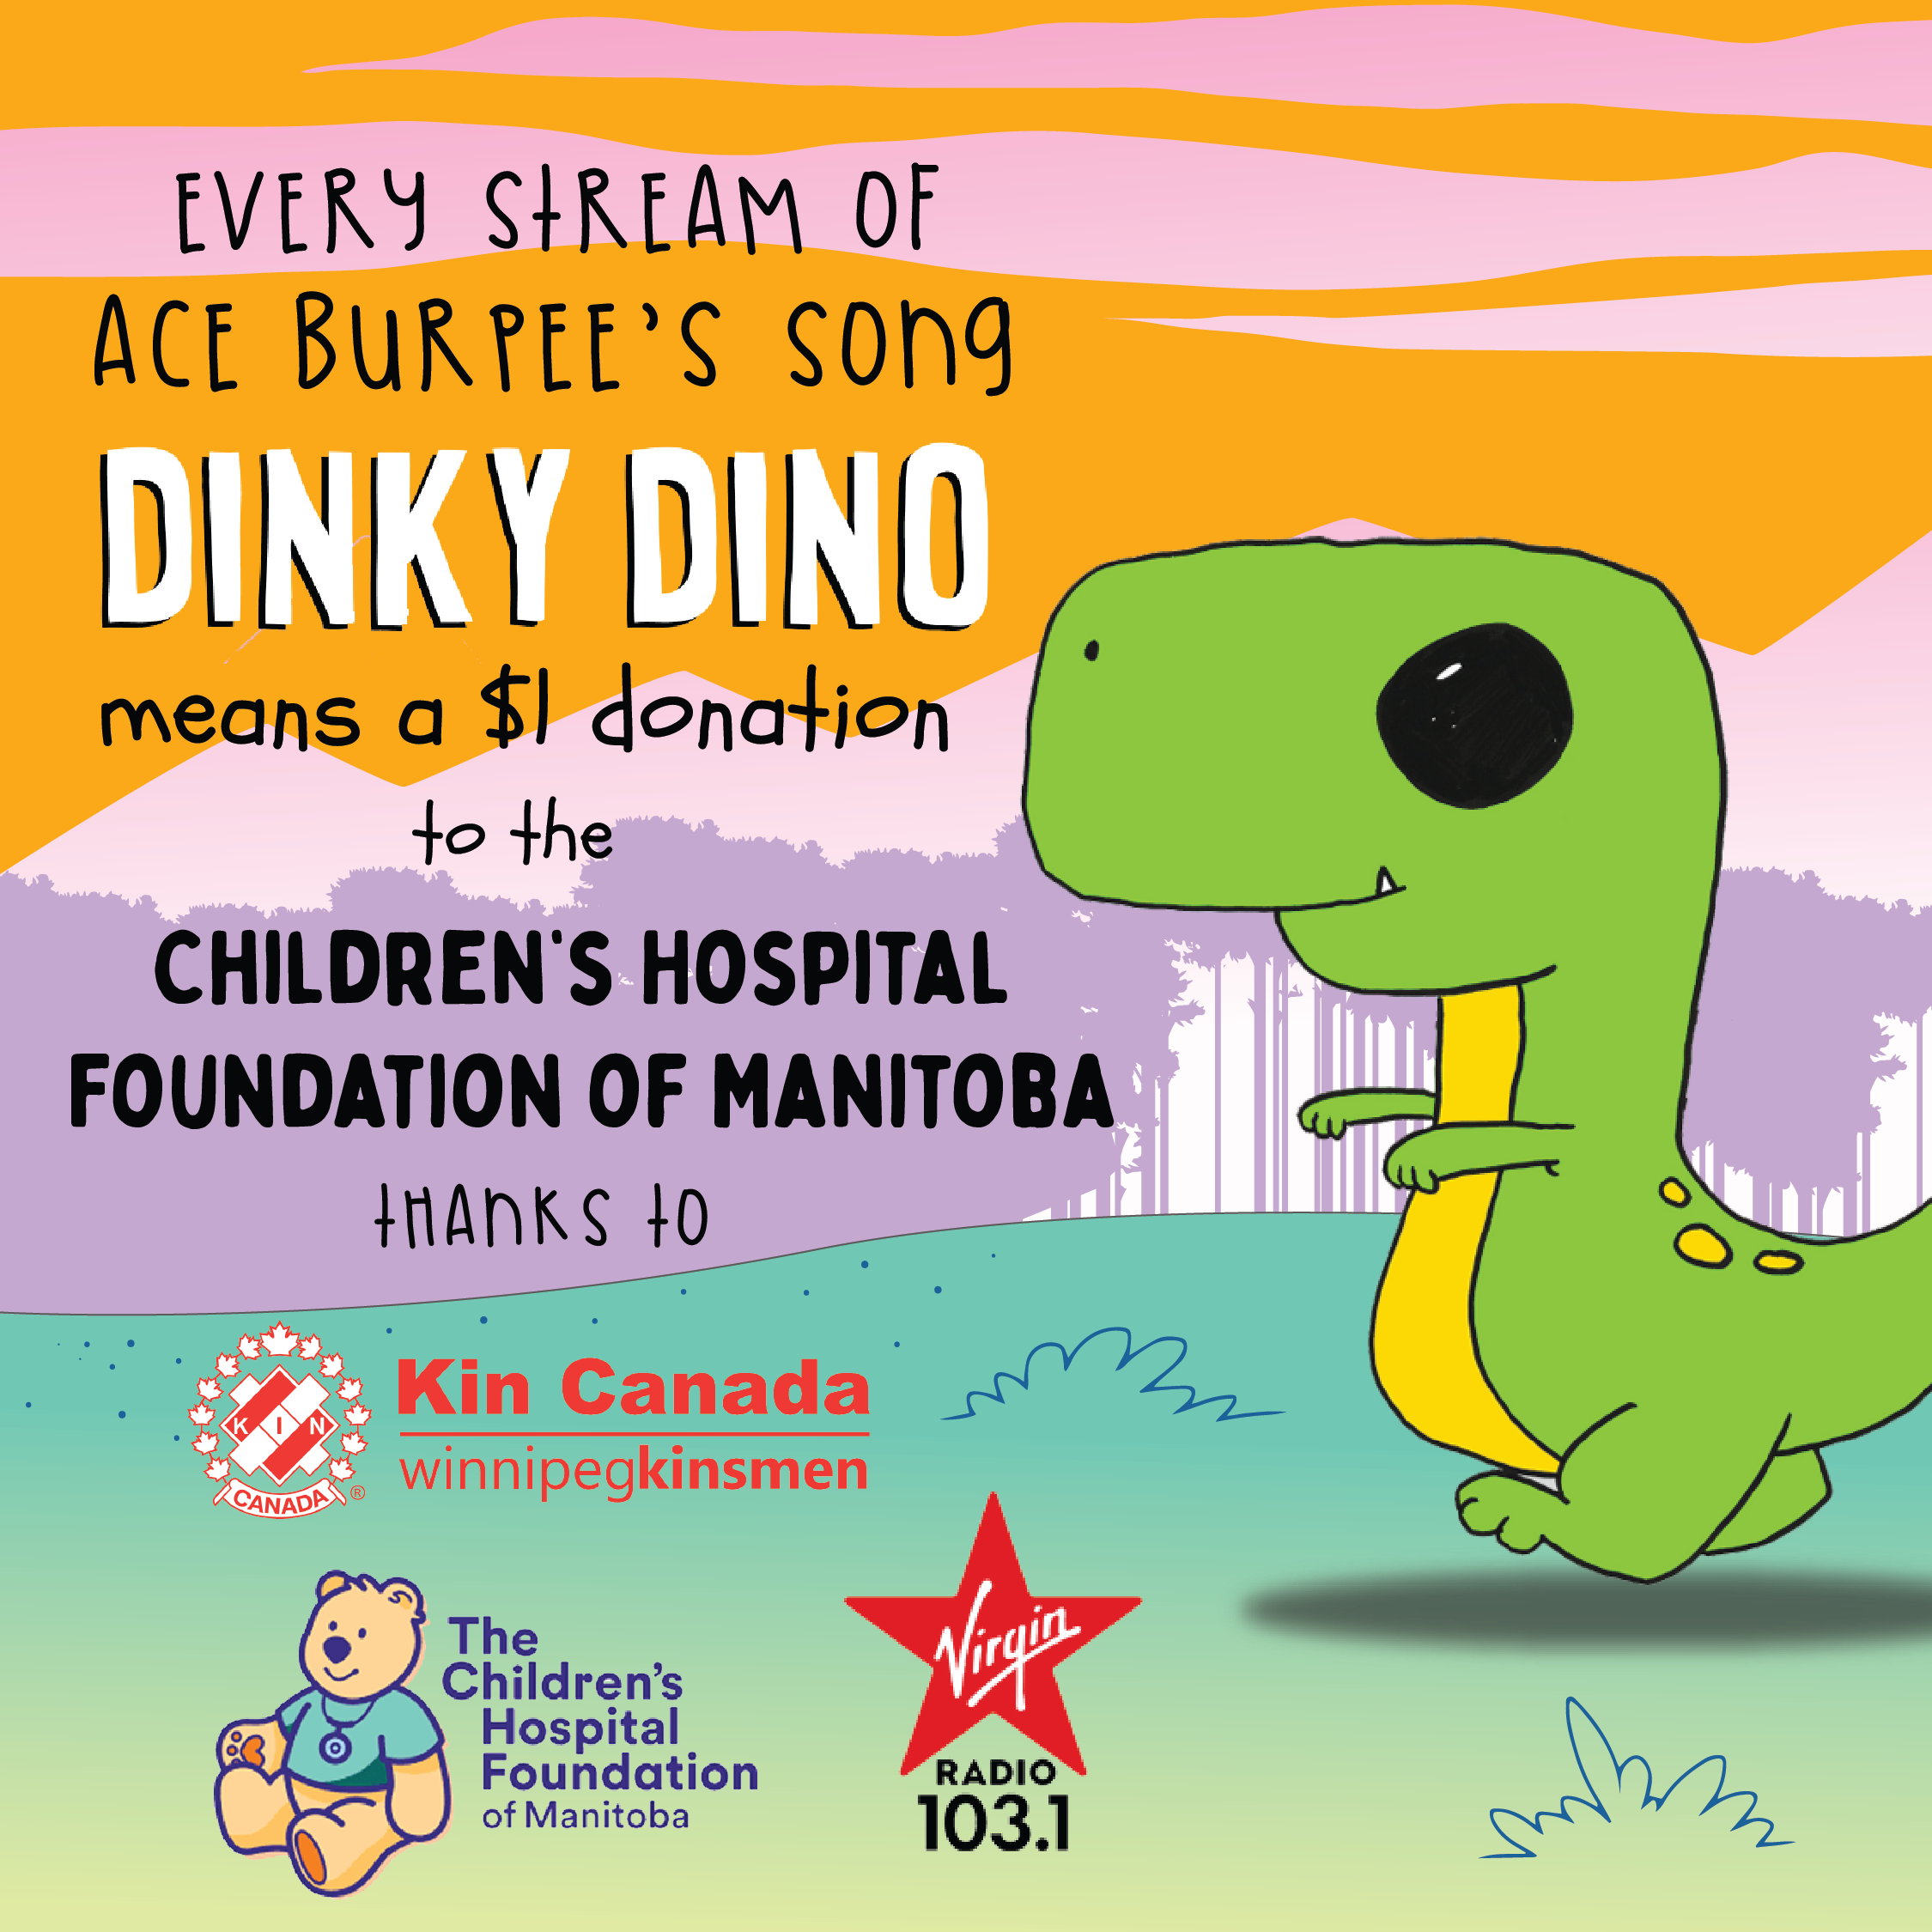 Dinky Dino - Stream to donate $1 to the Children's Hospital Foundation of Manitoba